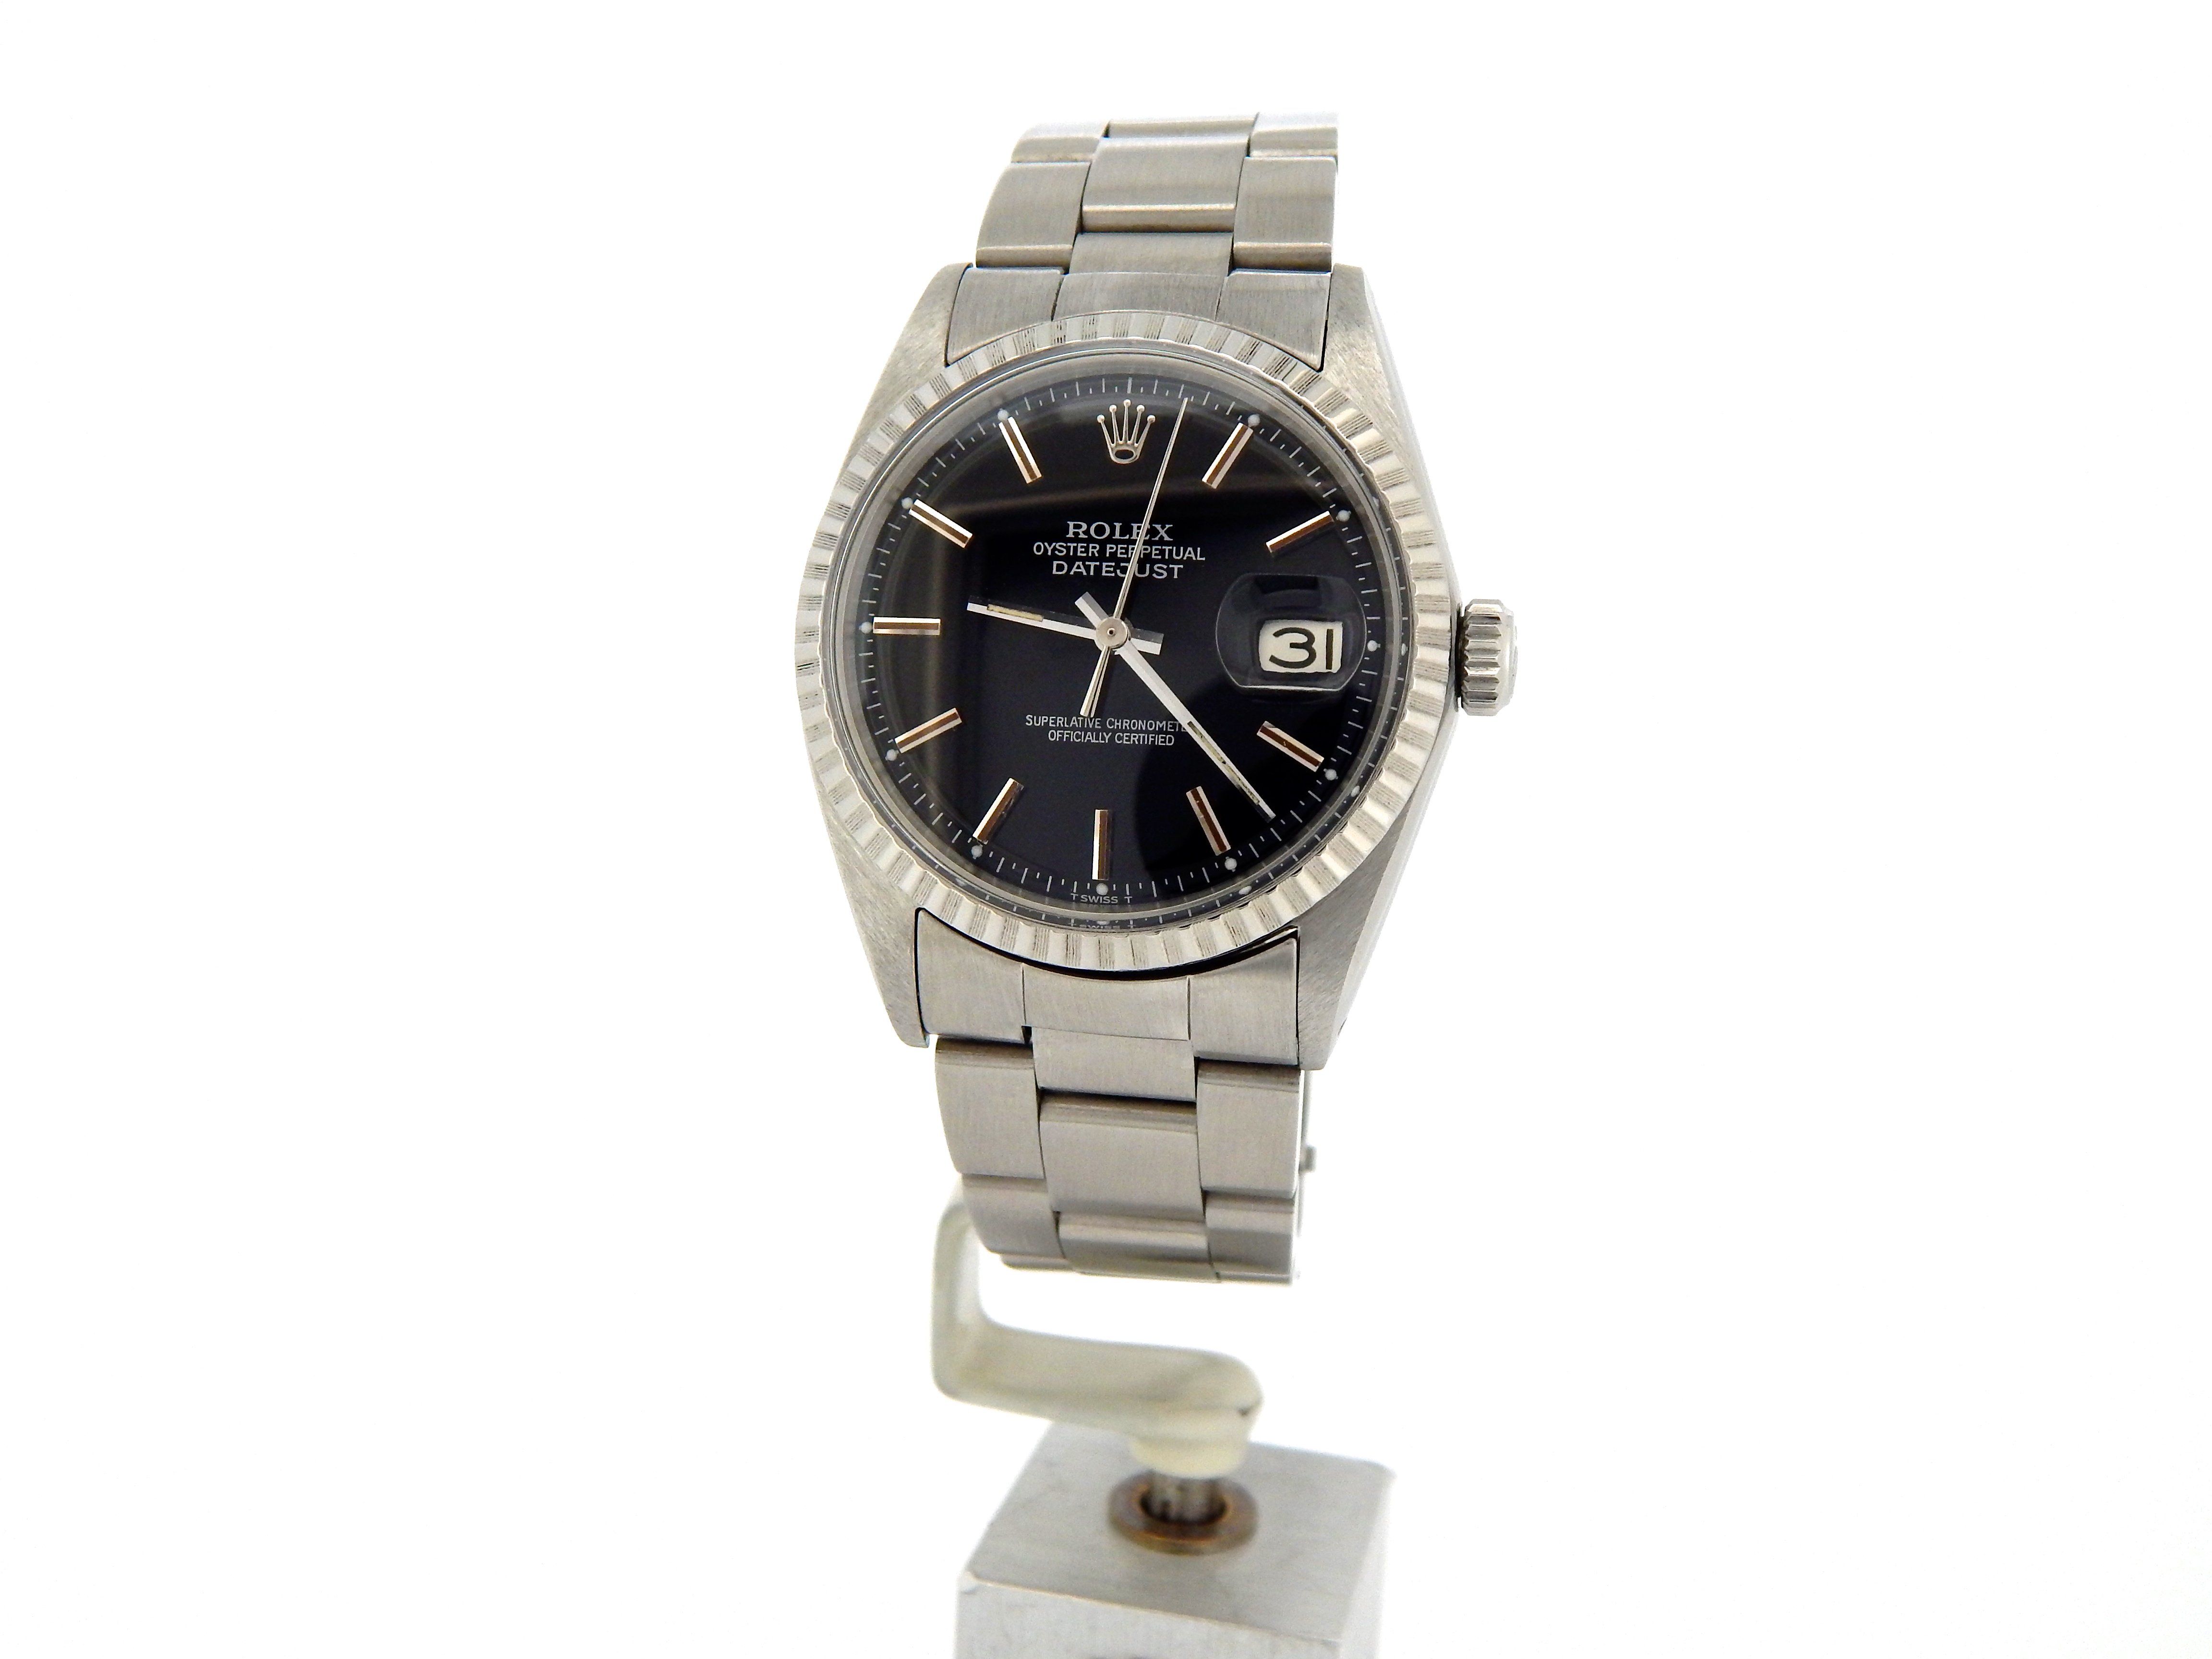 Preowned Customized Rolex Mens Datejust 1603 Stainless Steel Watch (Certified Authentic/Warranty)